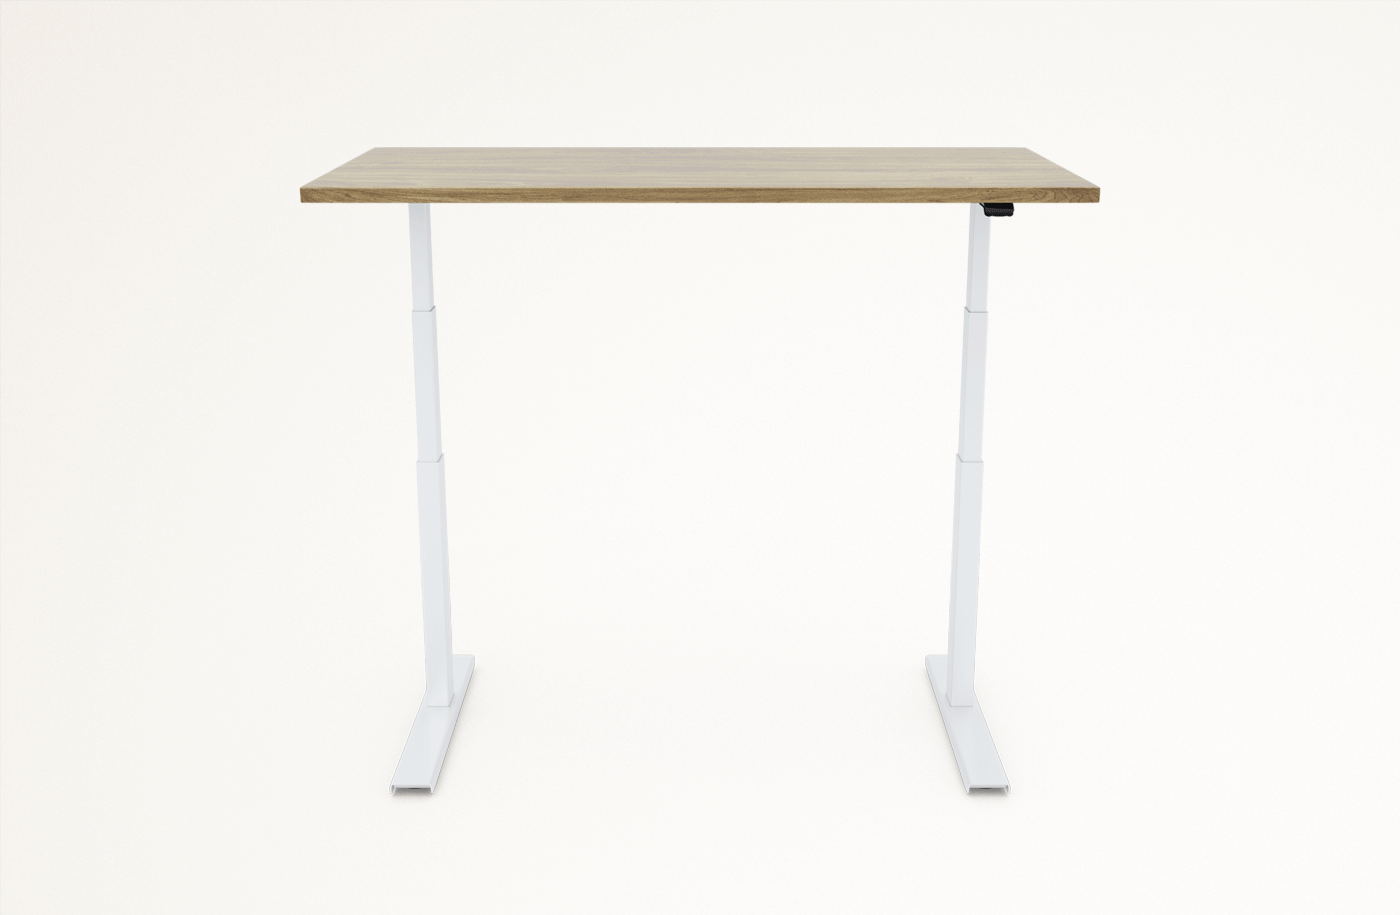 product minimal 3D materials table clean furniture Health industrial Render